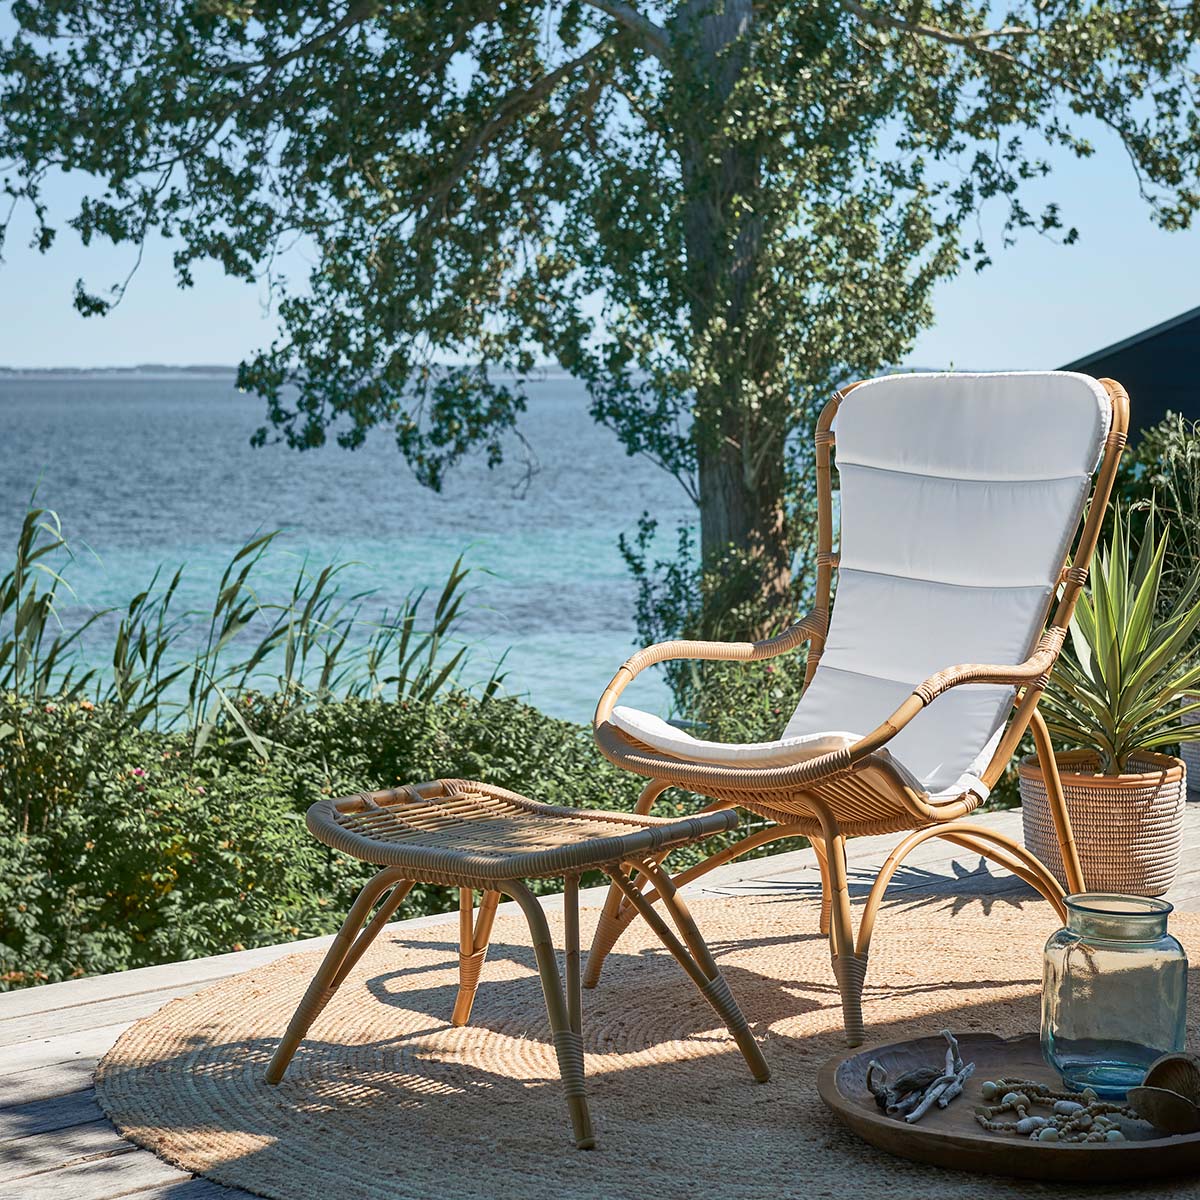 Outdoor Lounge Chair | Monet Exterior Lounge Chair - Sika-Design.com